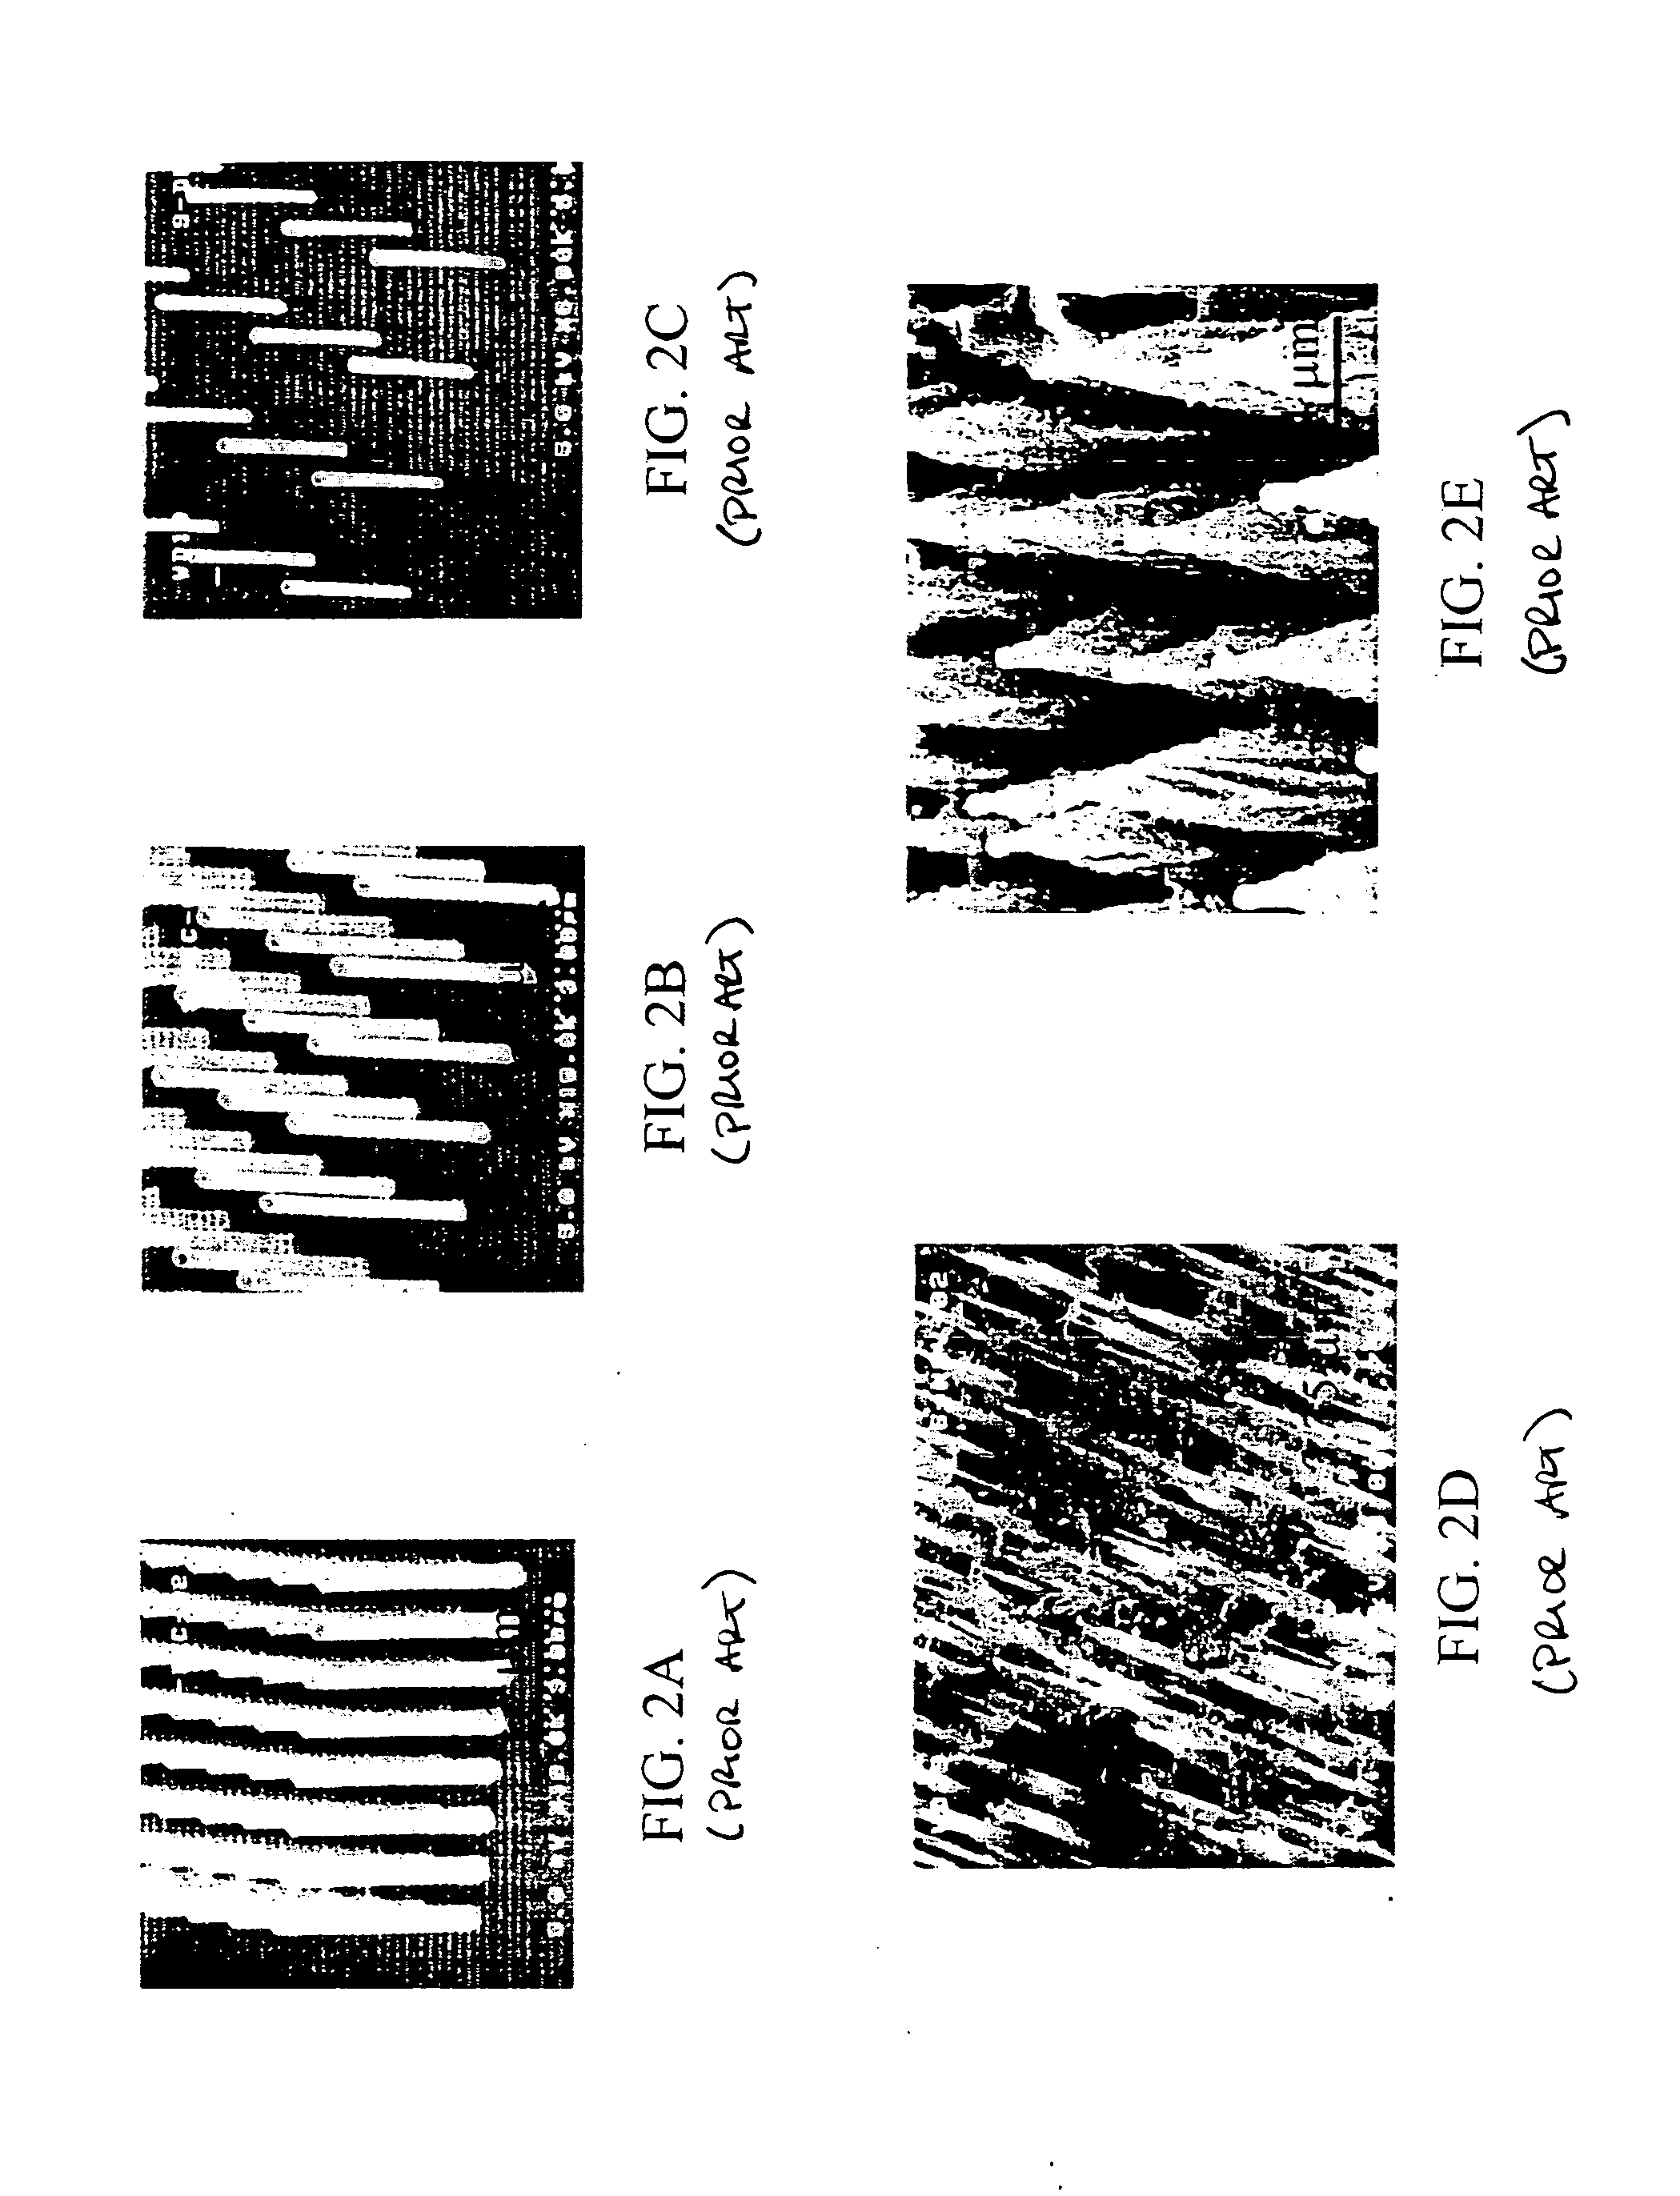 Method and apparatus for controlling friction between a fluid and a body